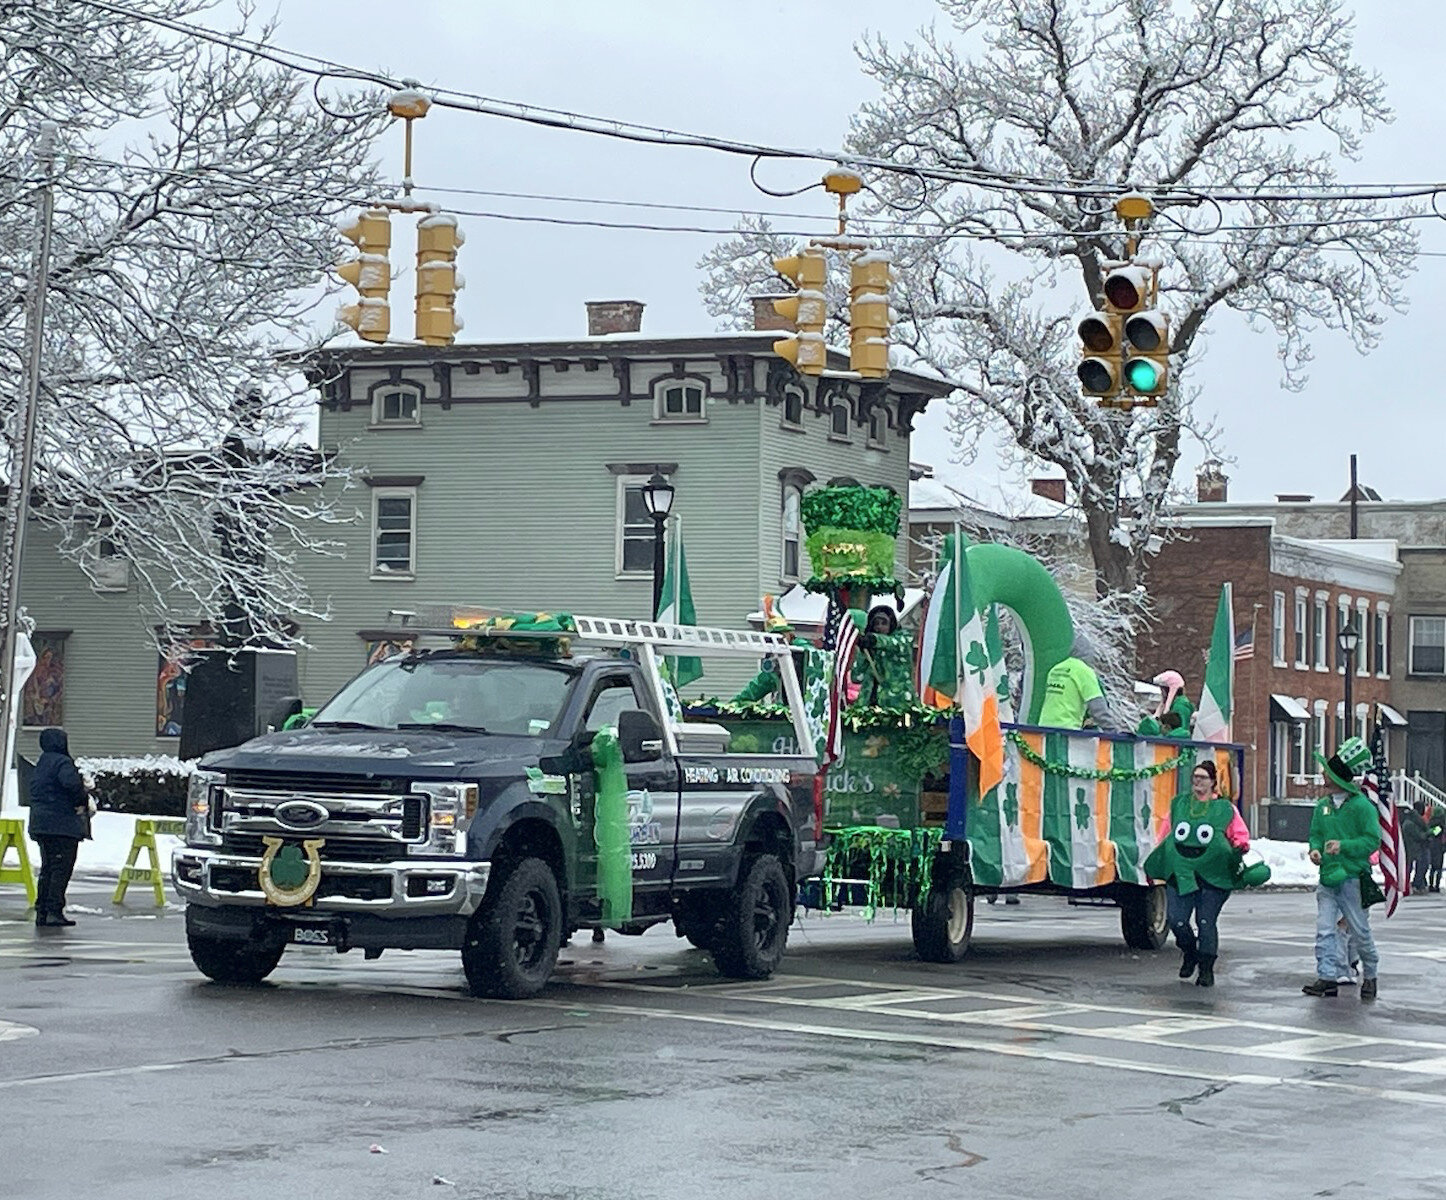 Country Suburban is all deked out in Irish pride as they make their way through Utica's St. Patrick's Day Parade.